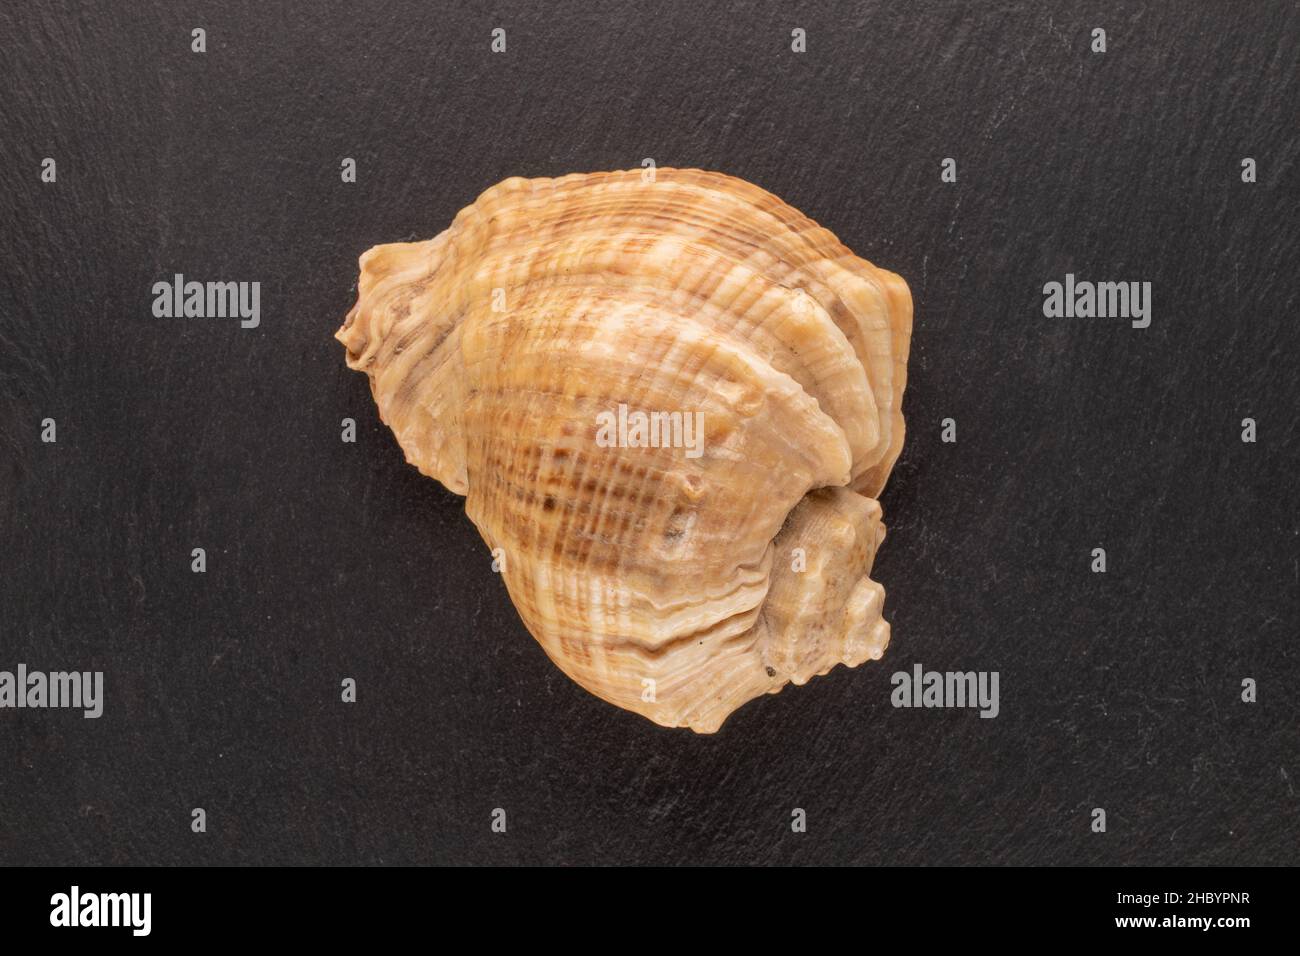 One seashell on a shale stone, close-up, top view. Stock Photo